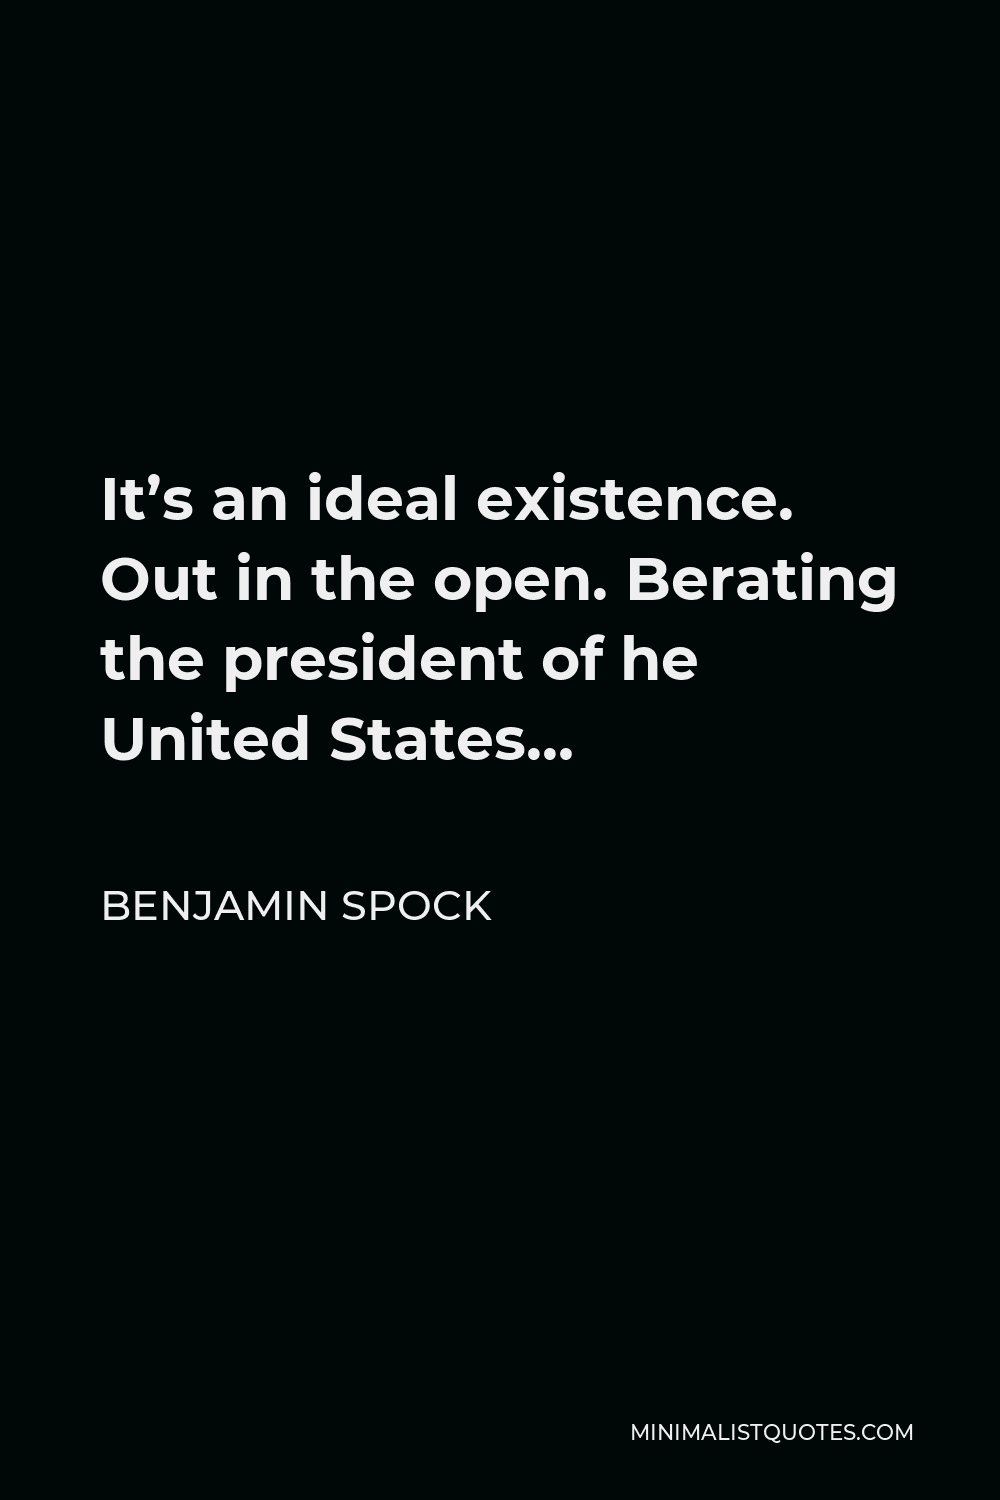 Benjamin Spock Quote - It’s an ideal existence. Out in the open. Berating the president of he United States…